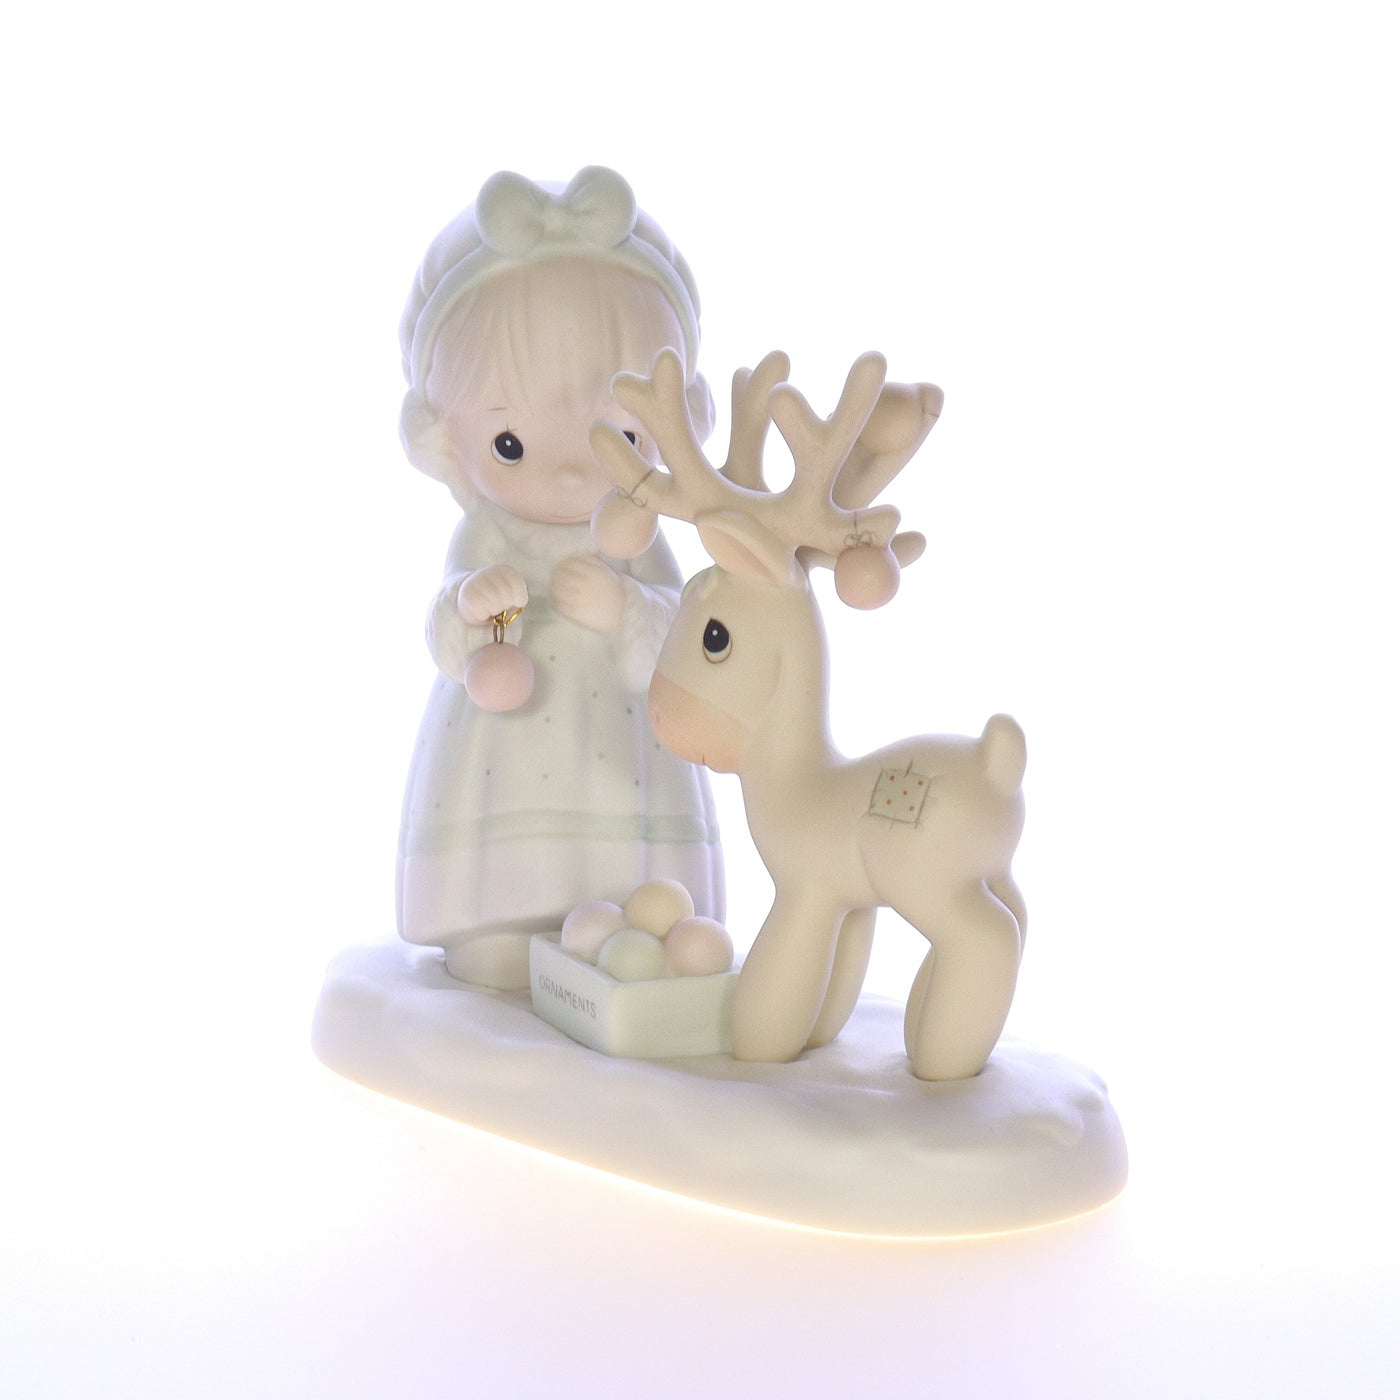 Precious_Moments_522317_Merry_Christmas_Deer_Christmas_Figurine_1989_Box Front Left View